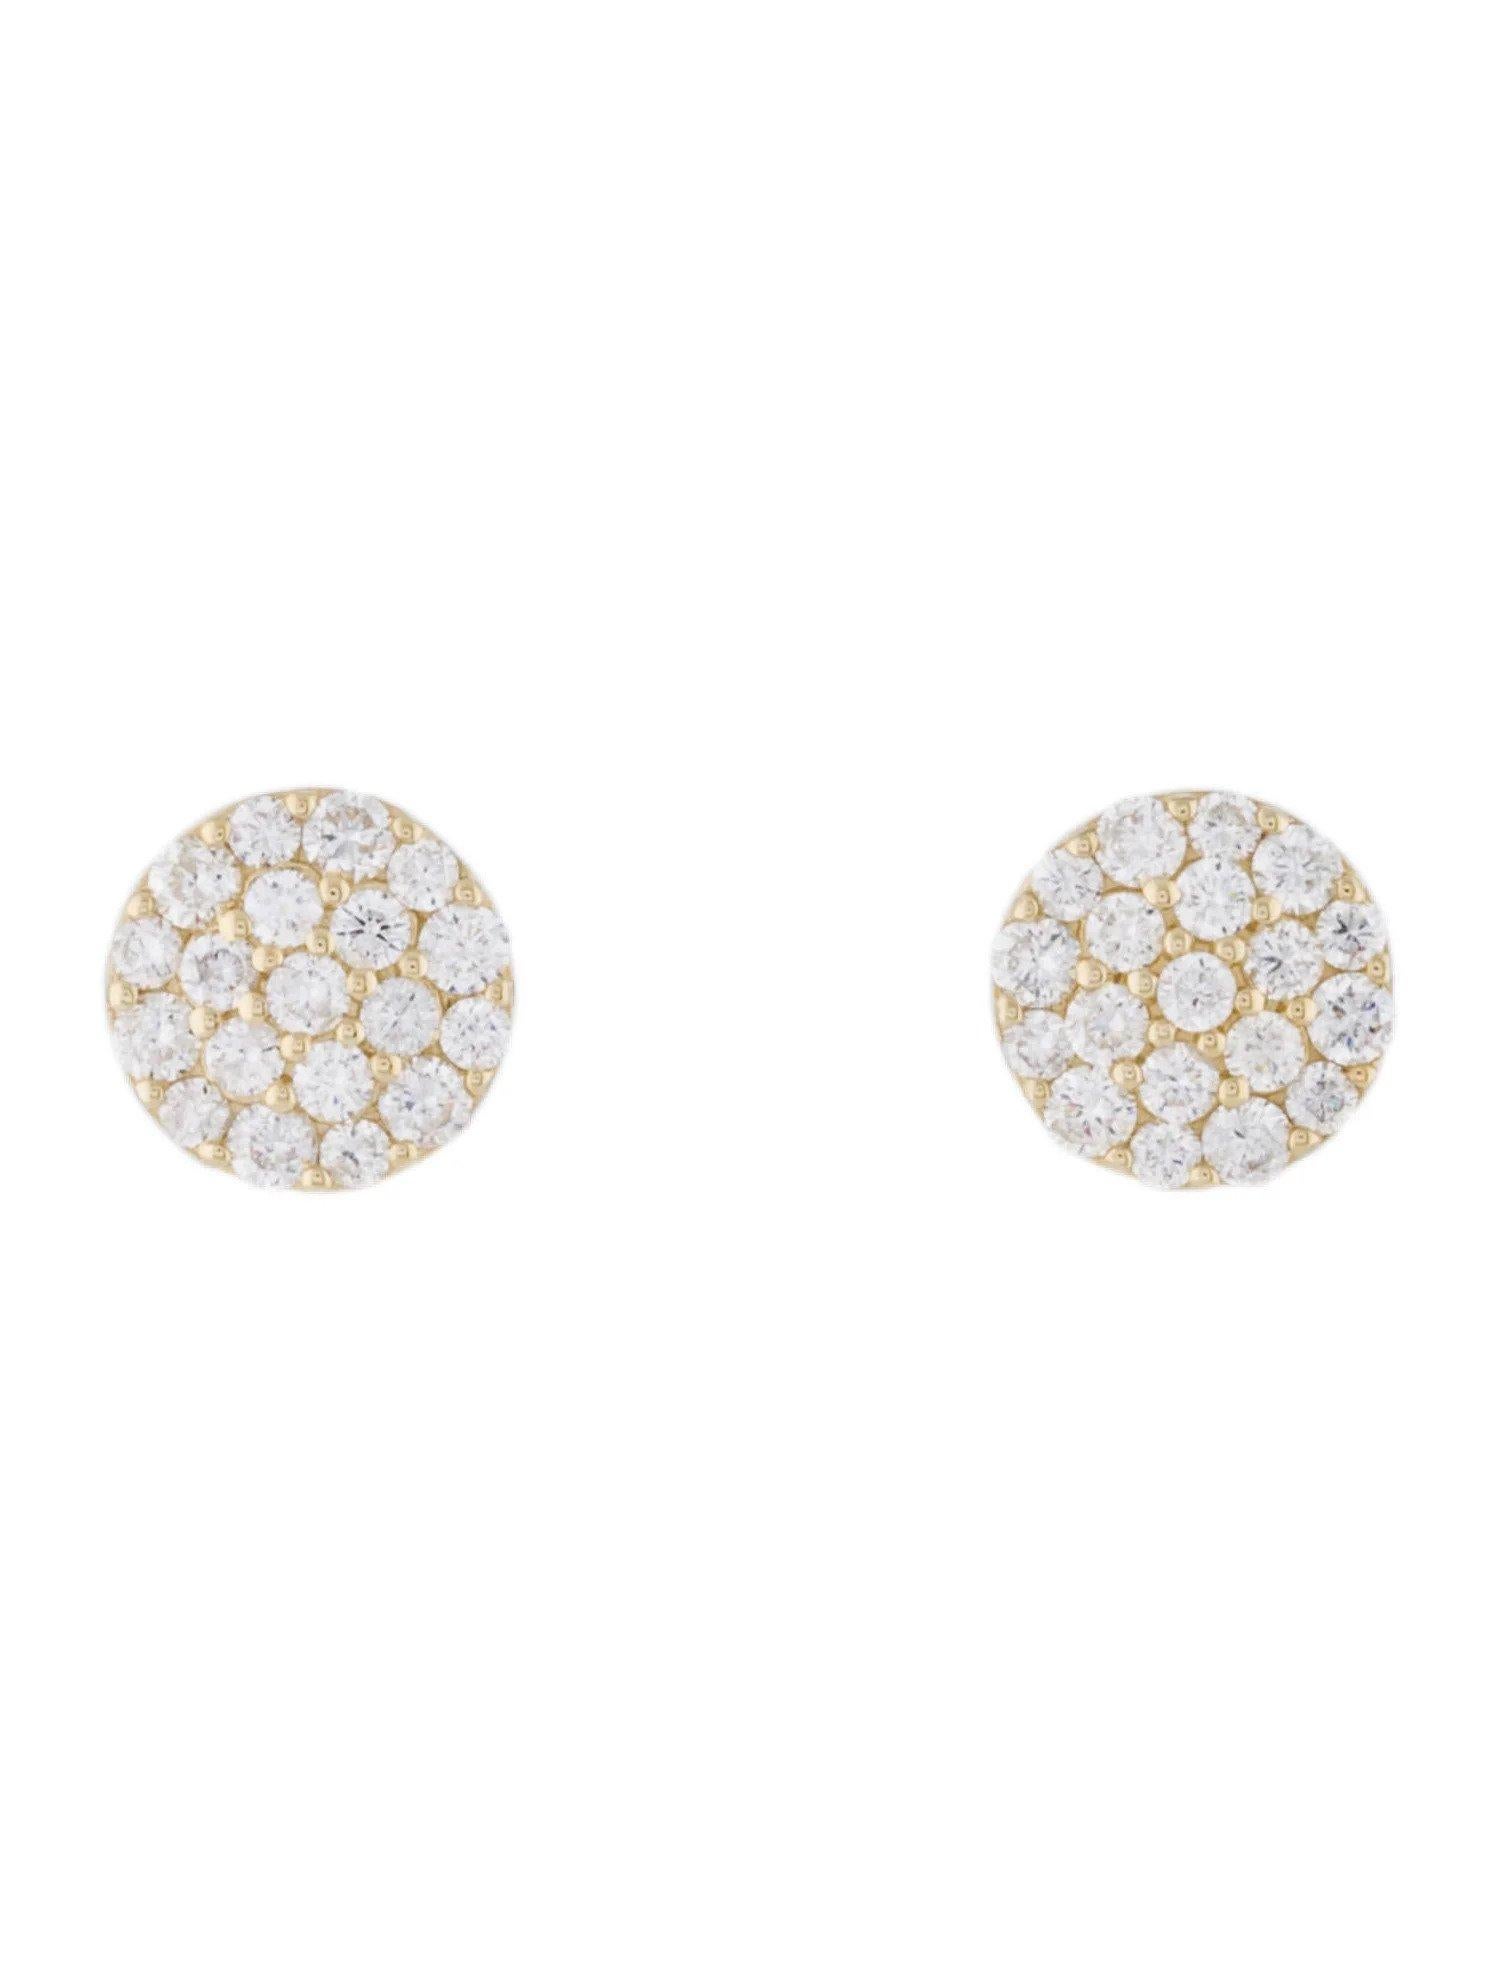 Contemporary 14K Yellow Gold Diamond Cluster Stud Earrings for Her For Sale